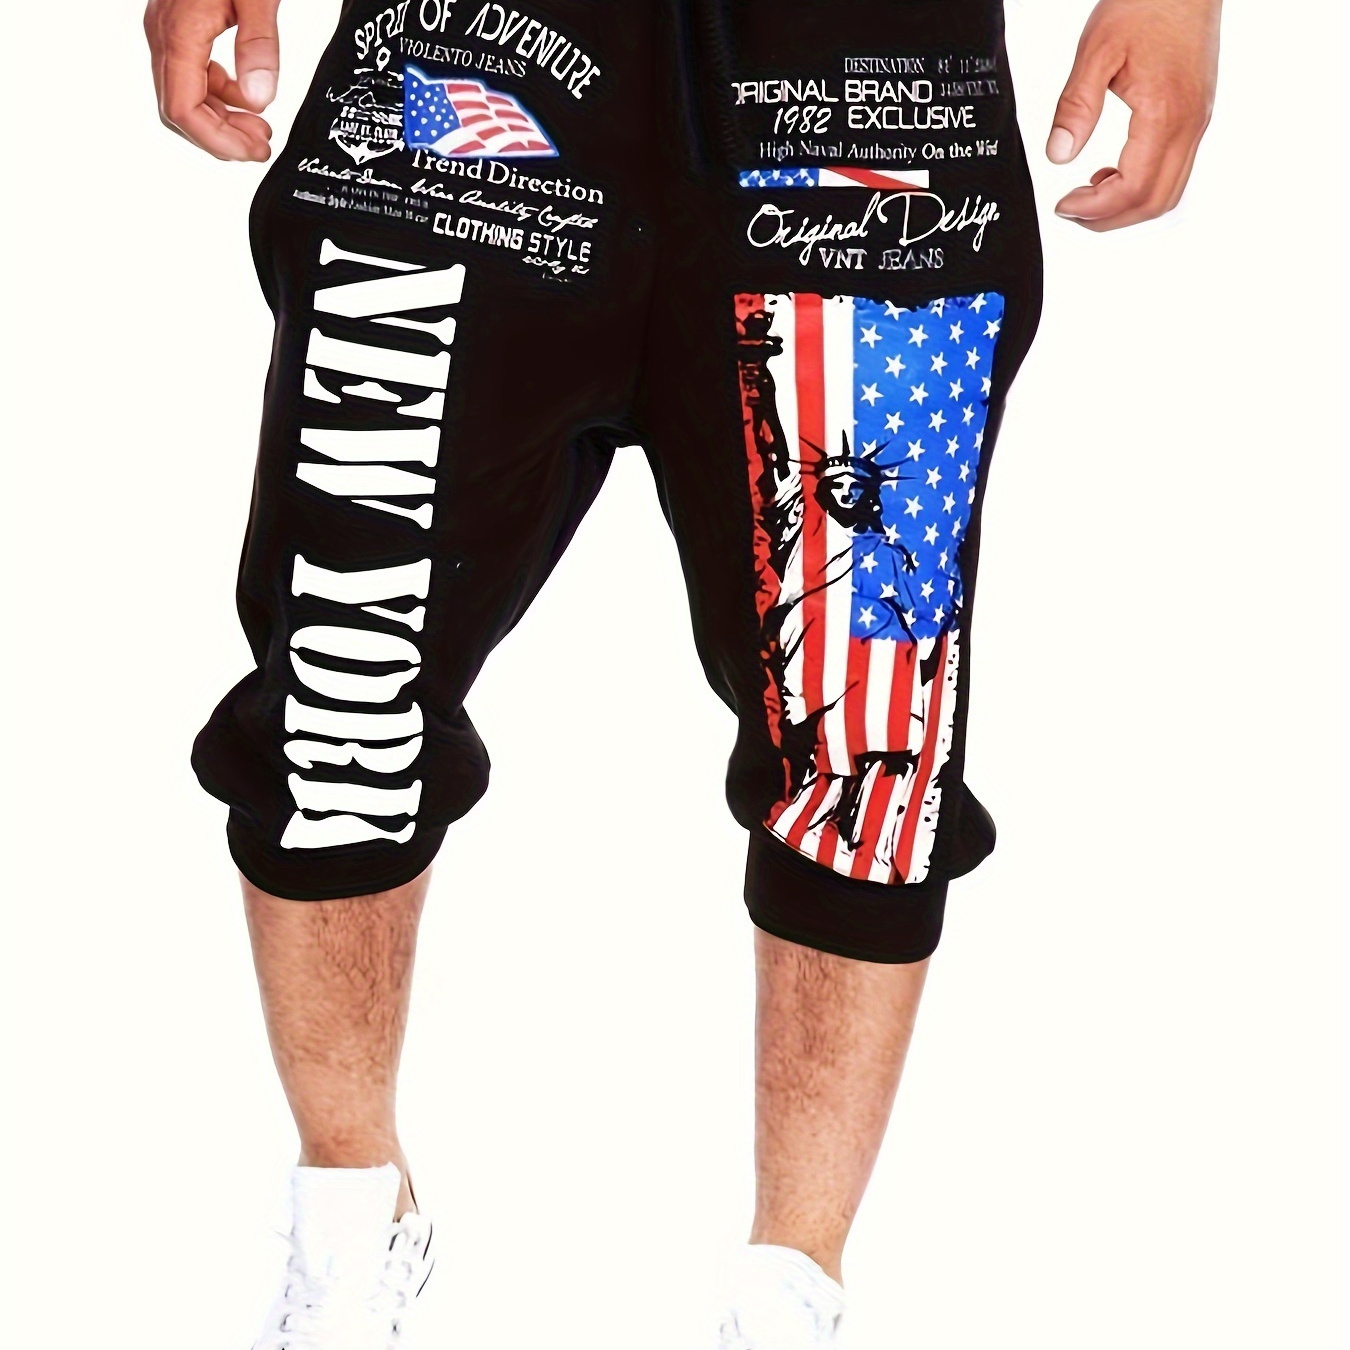 

American Flag Pattern And Letter Print "new York" Capri Pants With Drawstring And Pockets, Chic And Stylish Shorts For Men's Summer Jogging Workout And Outdoors Sports Wear